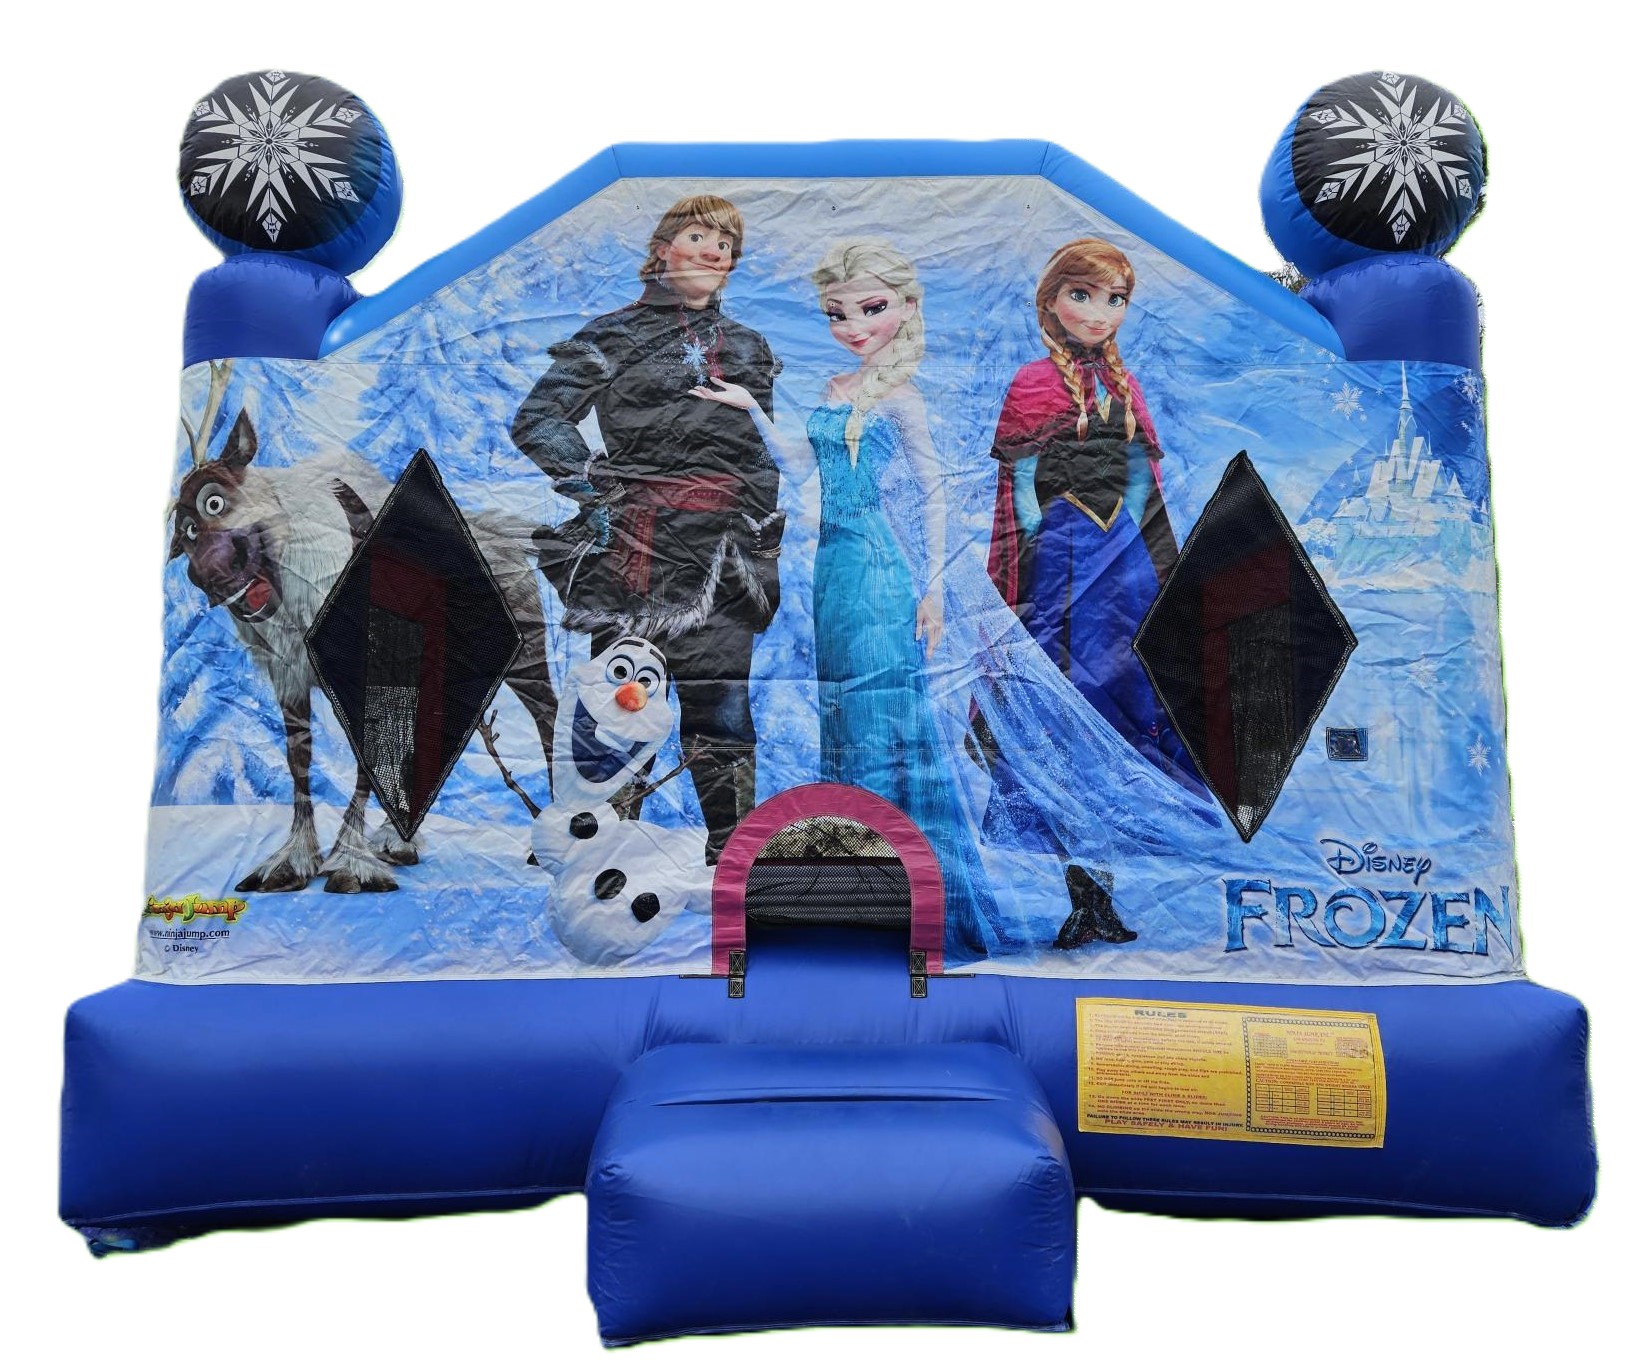 BH6 Large Frozen Jump Bounce House